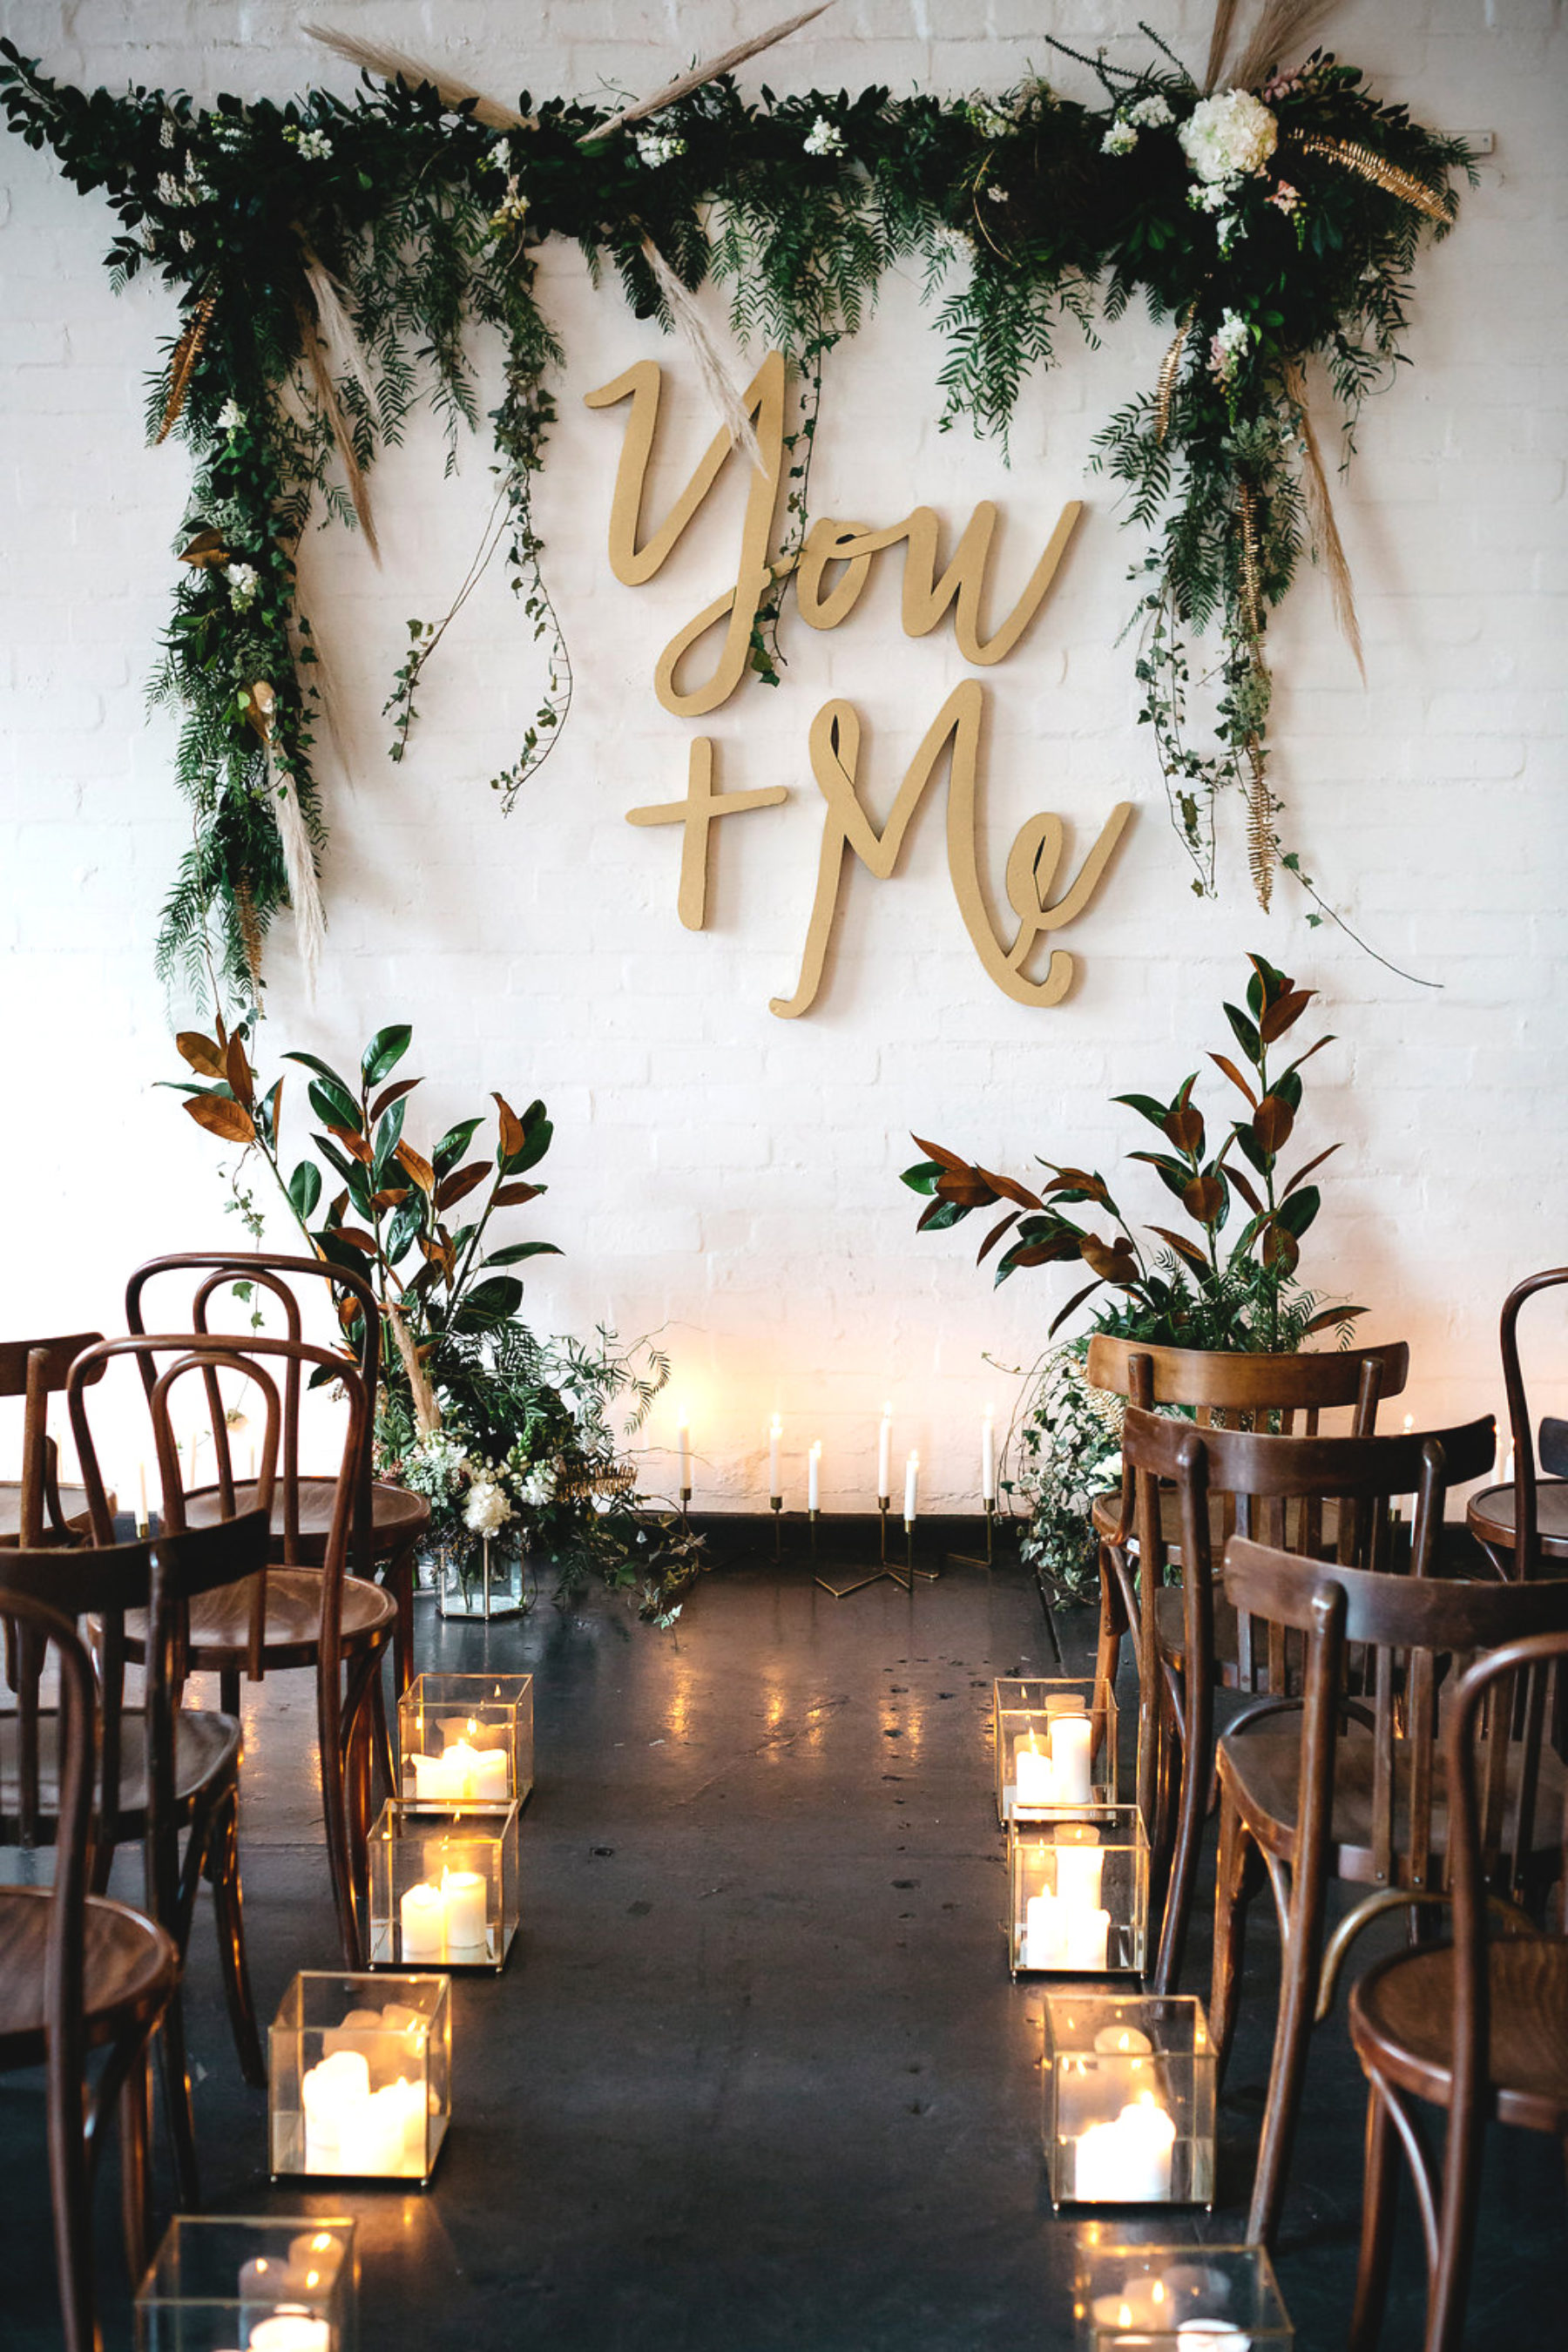 Perfect ceremony decor for a boho wedding style. Love the You and Me backdrop. // ❤️ Check Out These Gorgeous 20 Indoor Wedding Ceremony Ideas. // https://mysweetengagement.com/indoor-wedding-ceremony-ideas